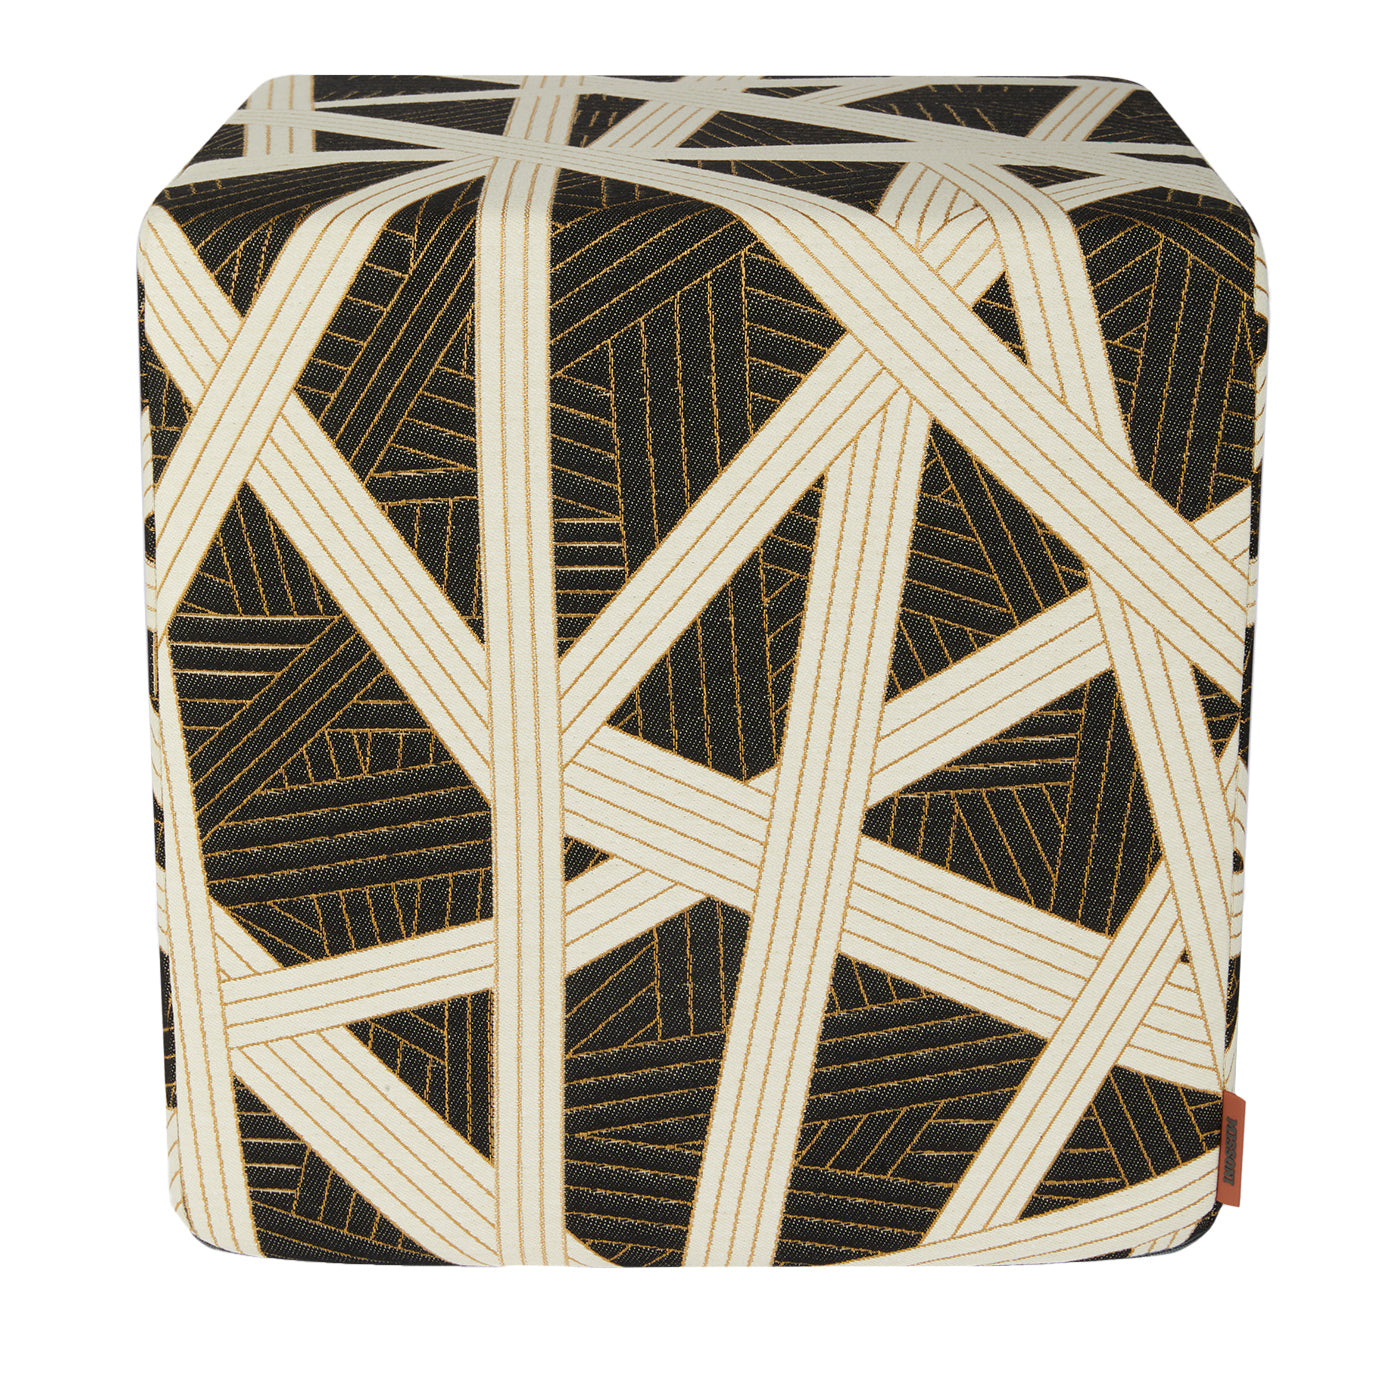 Nastri Cubic Black and Gold Stitching Pouf - Main view